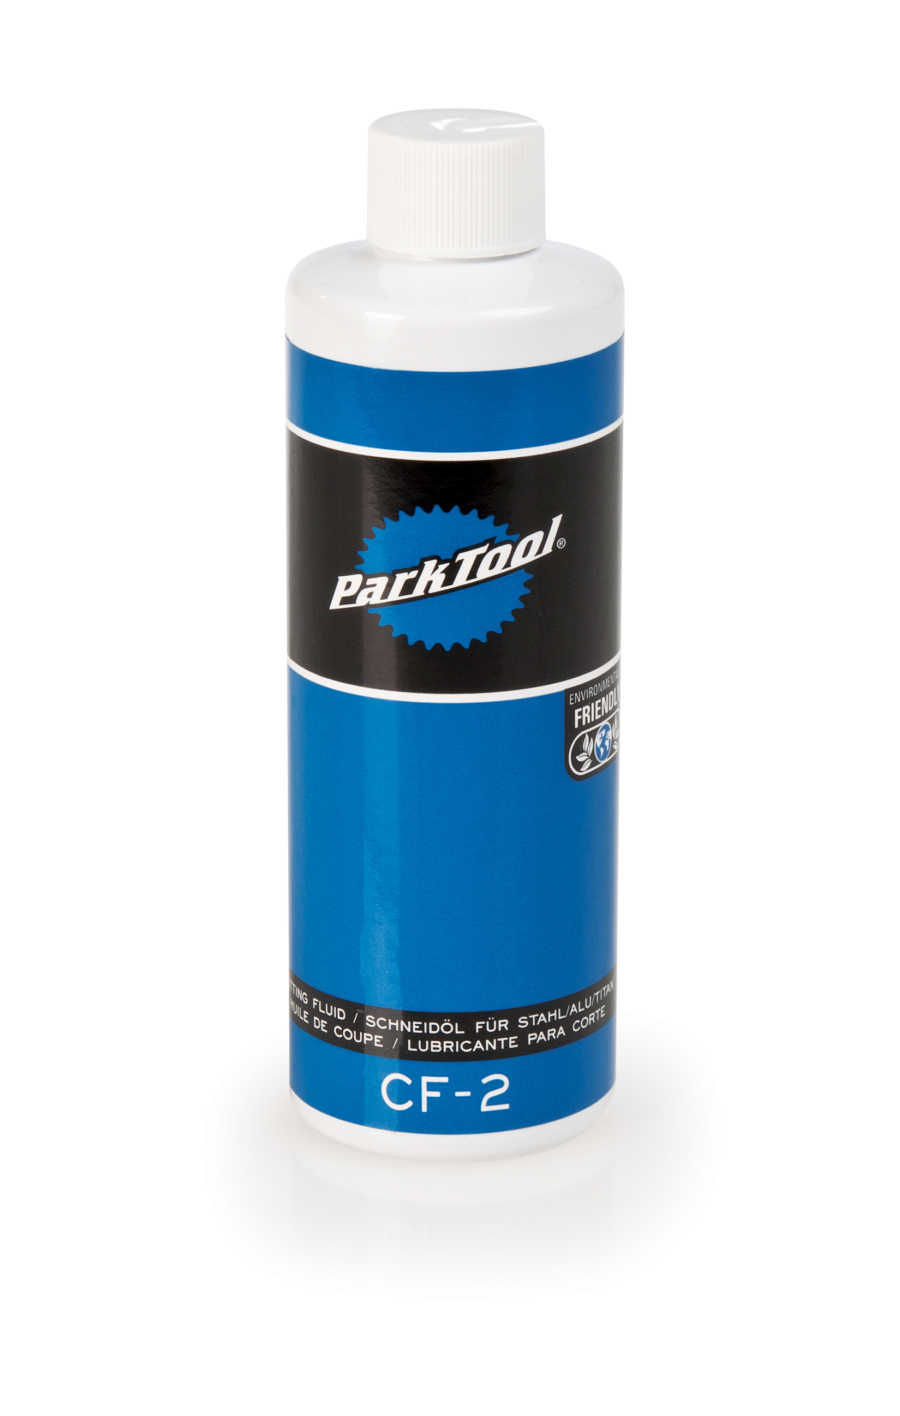 The Park Tool CF-1 Cutting Fluid, enlarged